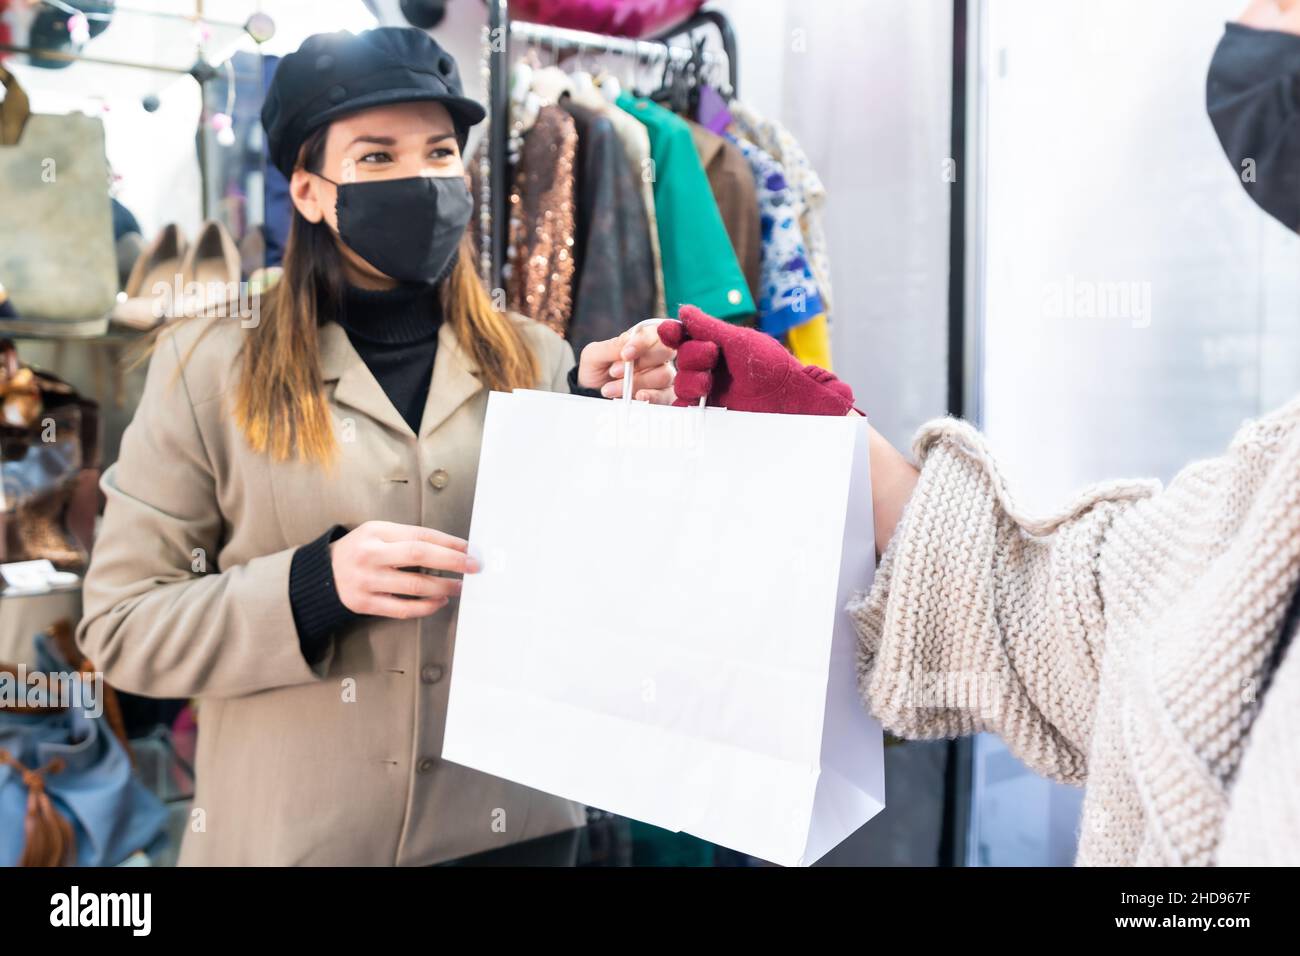 Employee with masks in a clothing store handing over clothes to a customer, security measures in the coronavirus pandemic, covid-19 Stock Photo